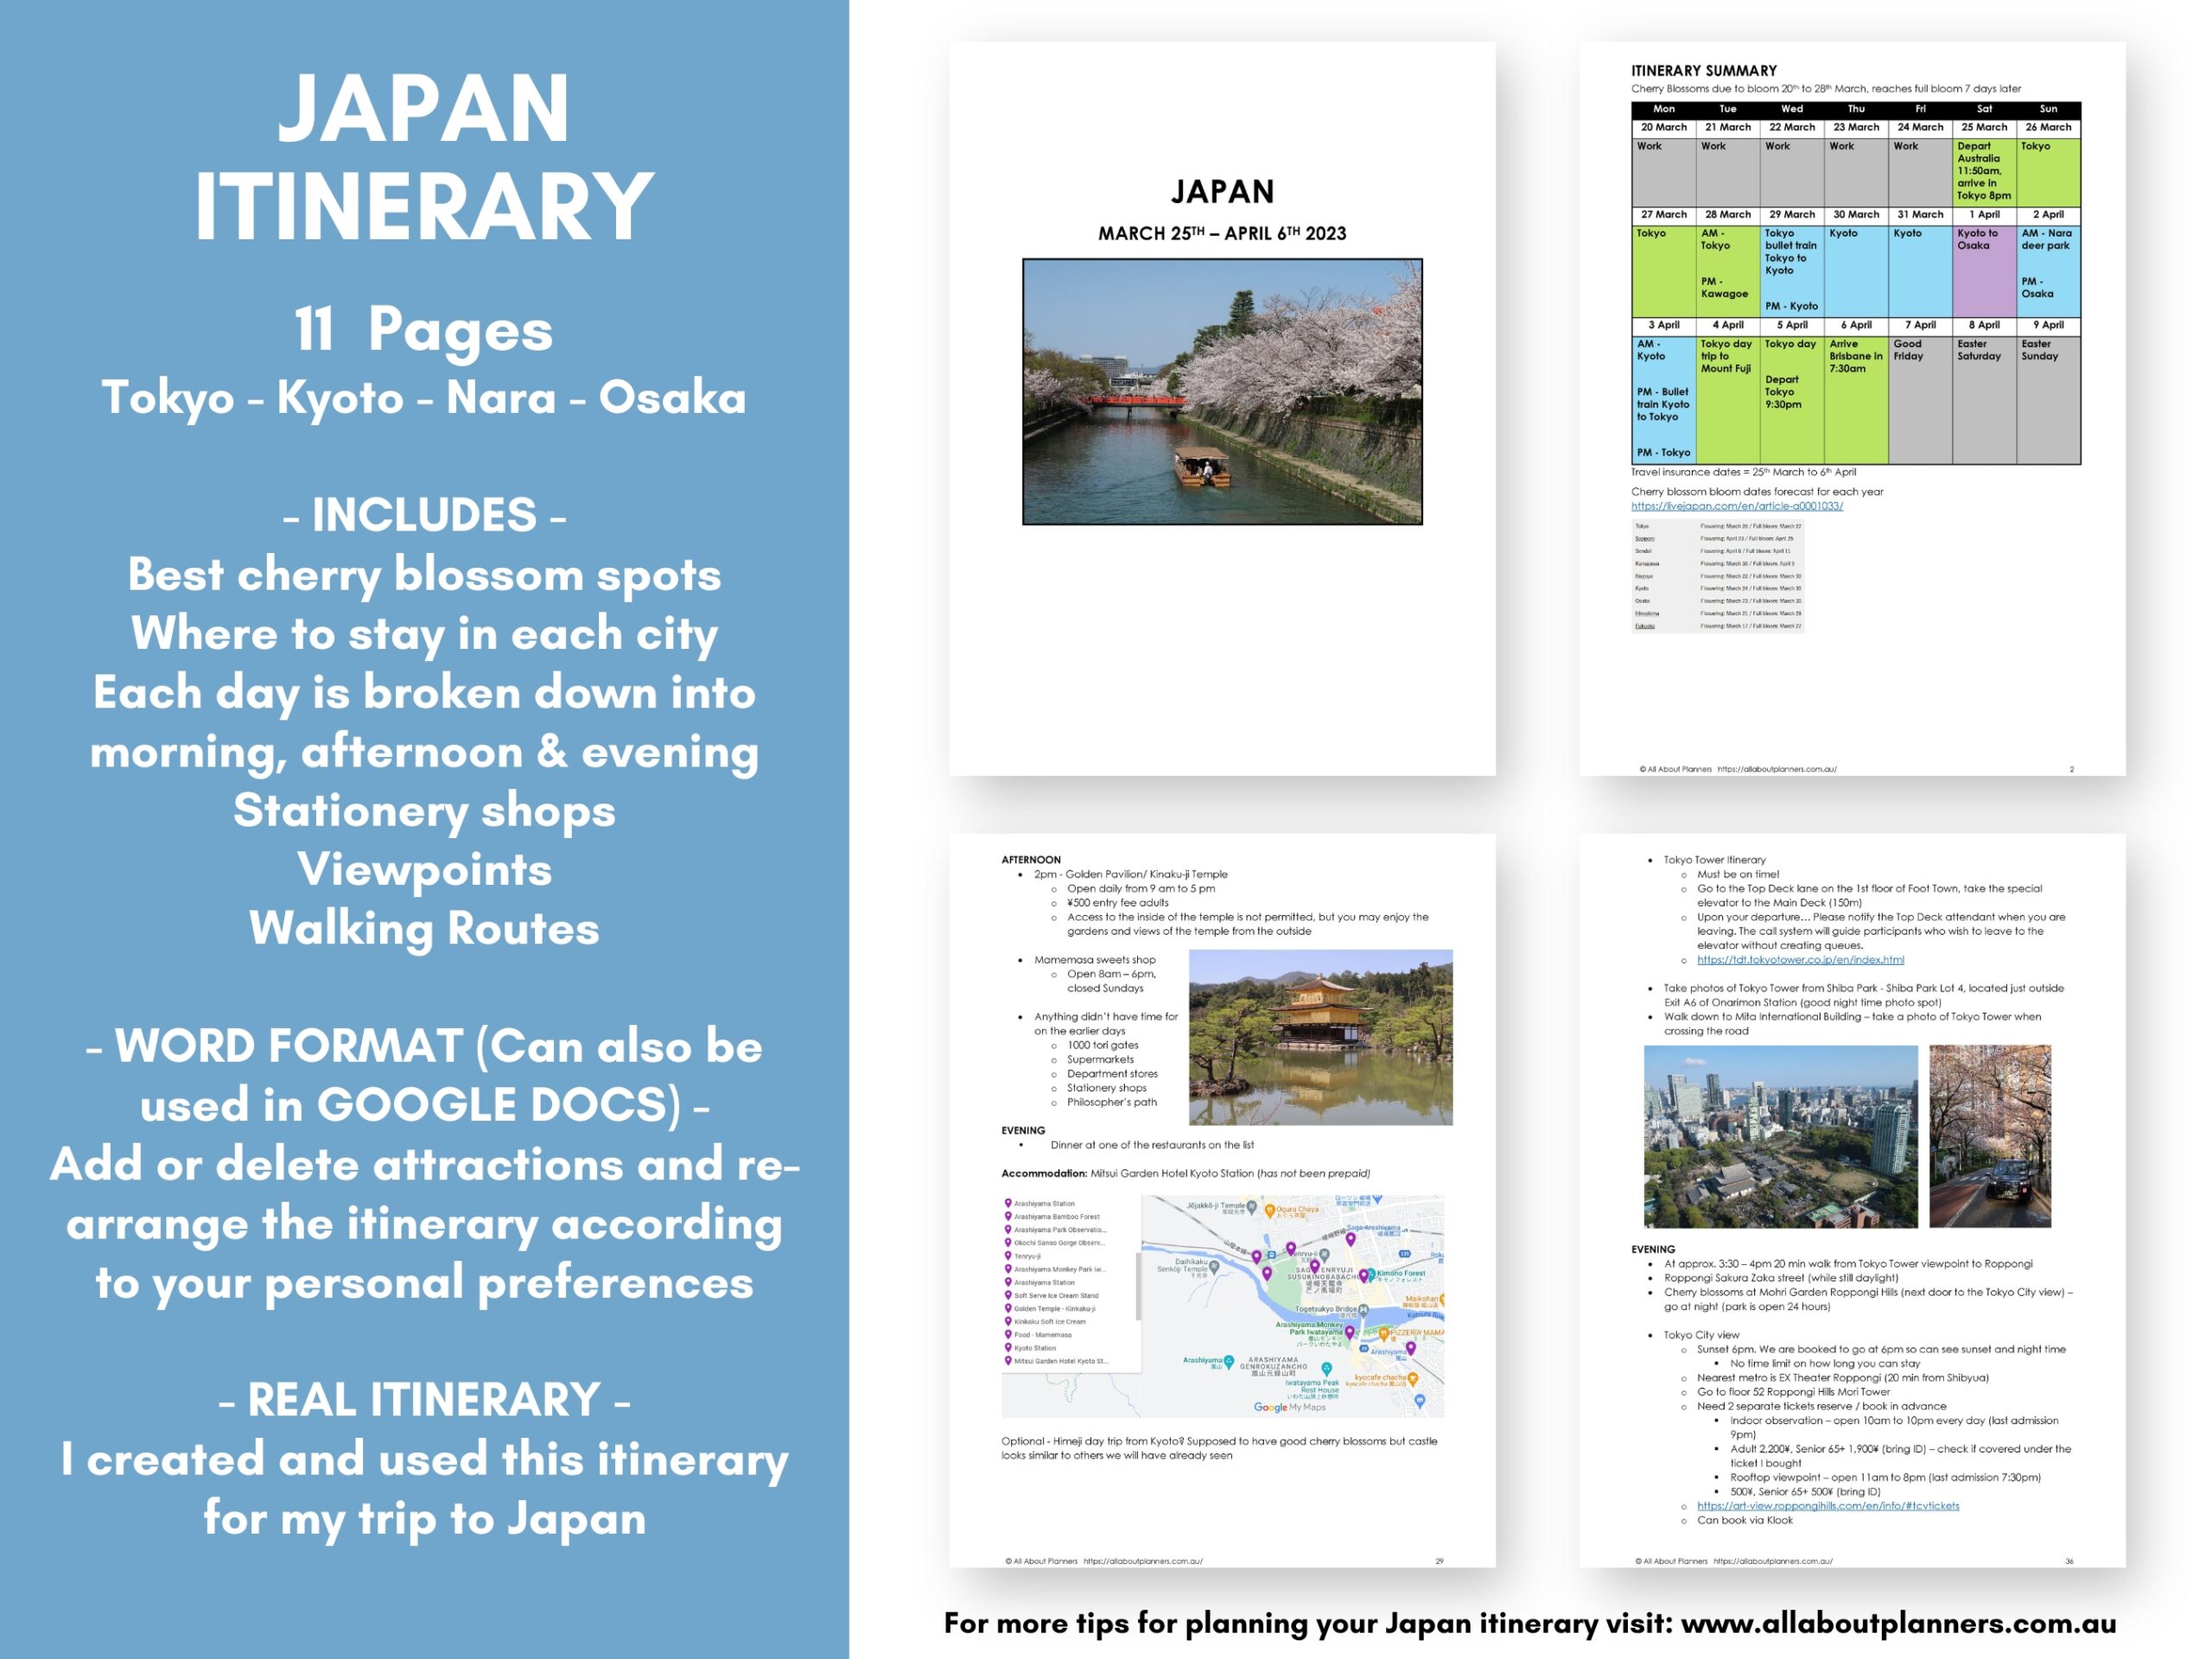 Japan itinerary detailed daily schedule cherry blossom season 11 days attractions viewpoints photo spots digital download